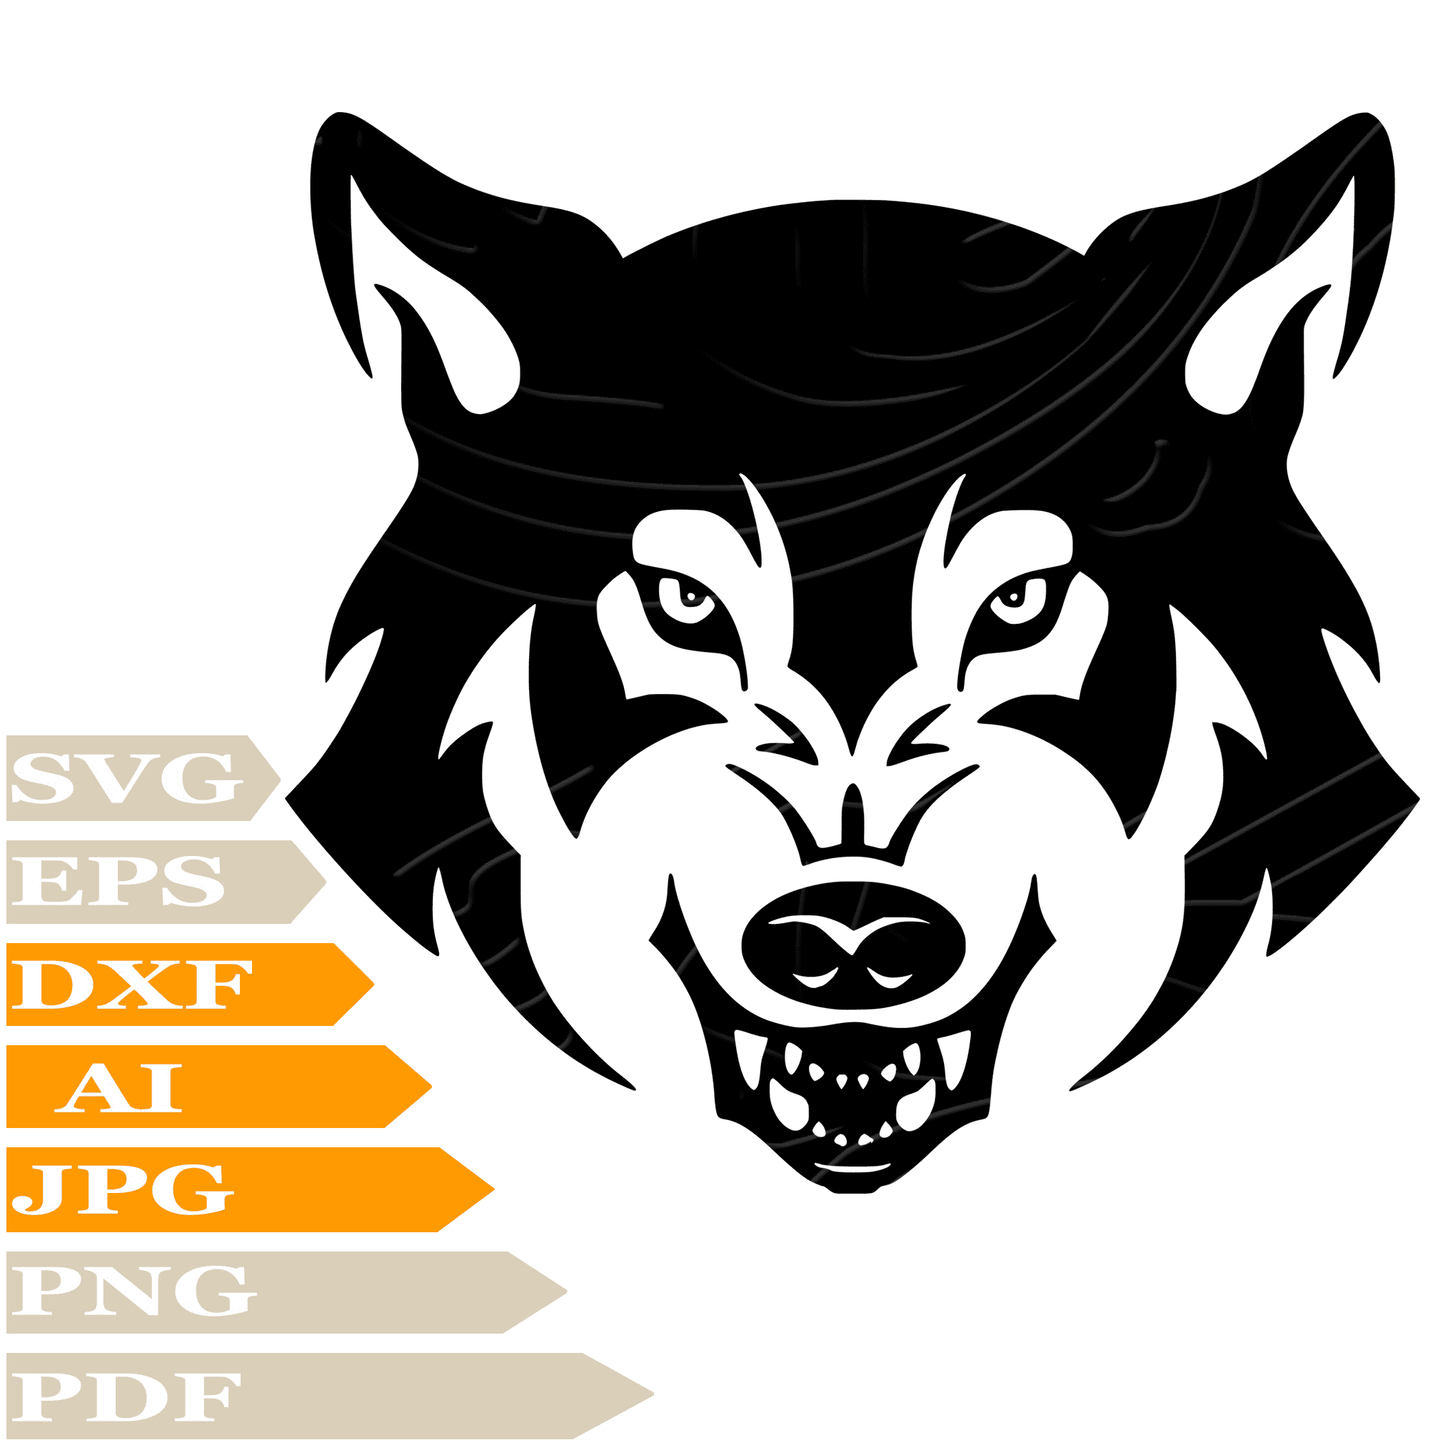 Sofvintage-Wolf SVG-Wolf Head SVG Design-Wild Animals SVG File-Wild Wolf Face Digital Vector Download-Wolf PNG-Angry Wolf For Cricut-Wolf Clip art-Wild Wolf Cut File-Wolf Head T-Shirt-Wolf Wall Sticker-Angry Wolf For Tattoo-Wolf Printable-Wolf Head Silhouette